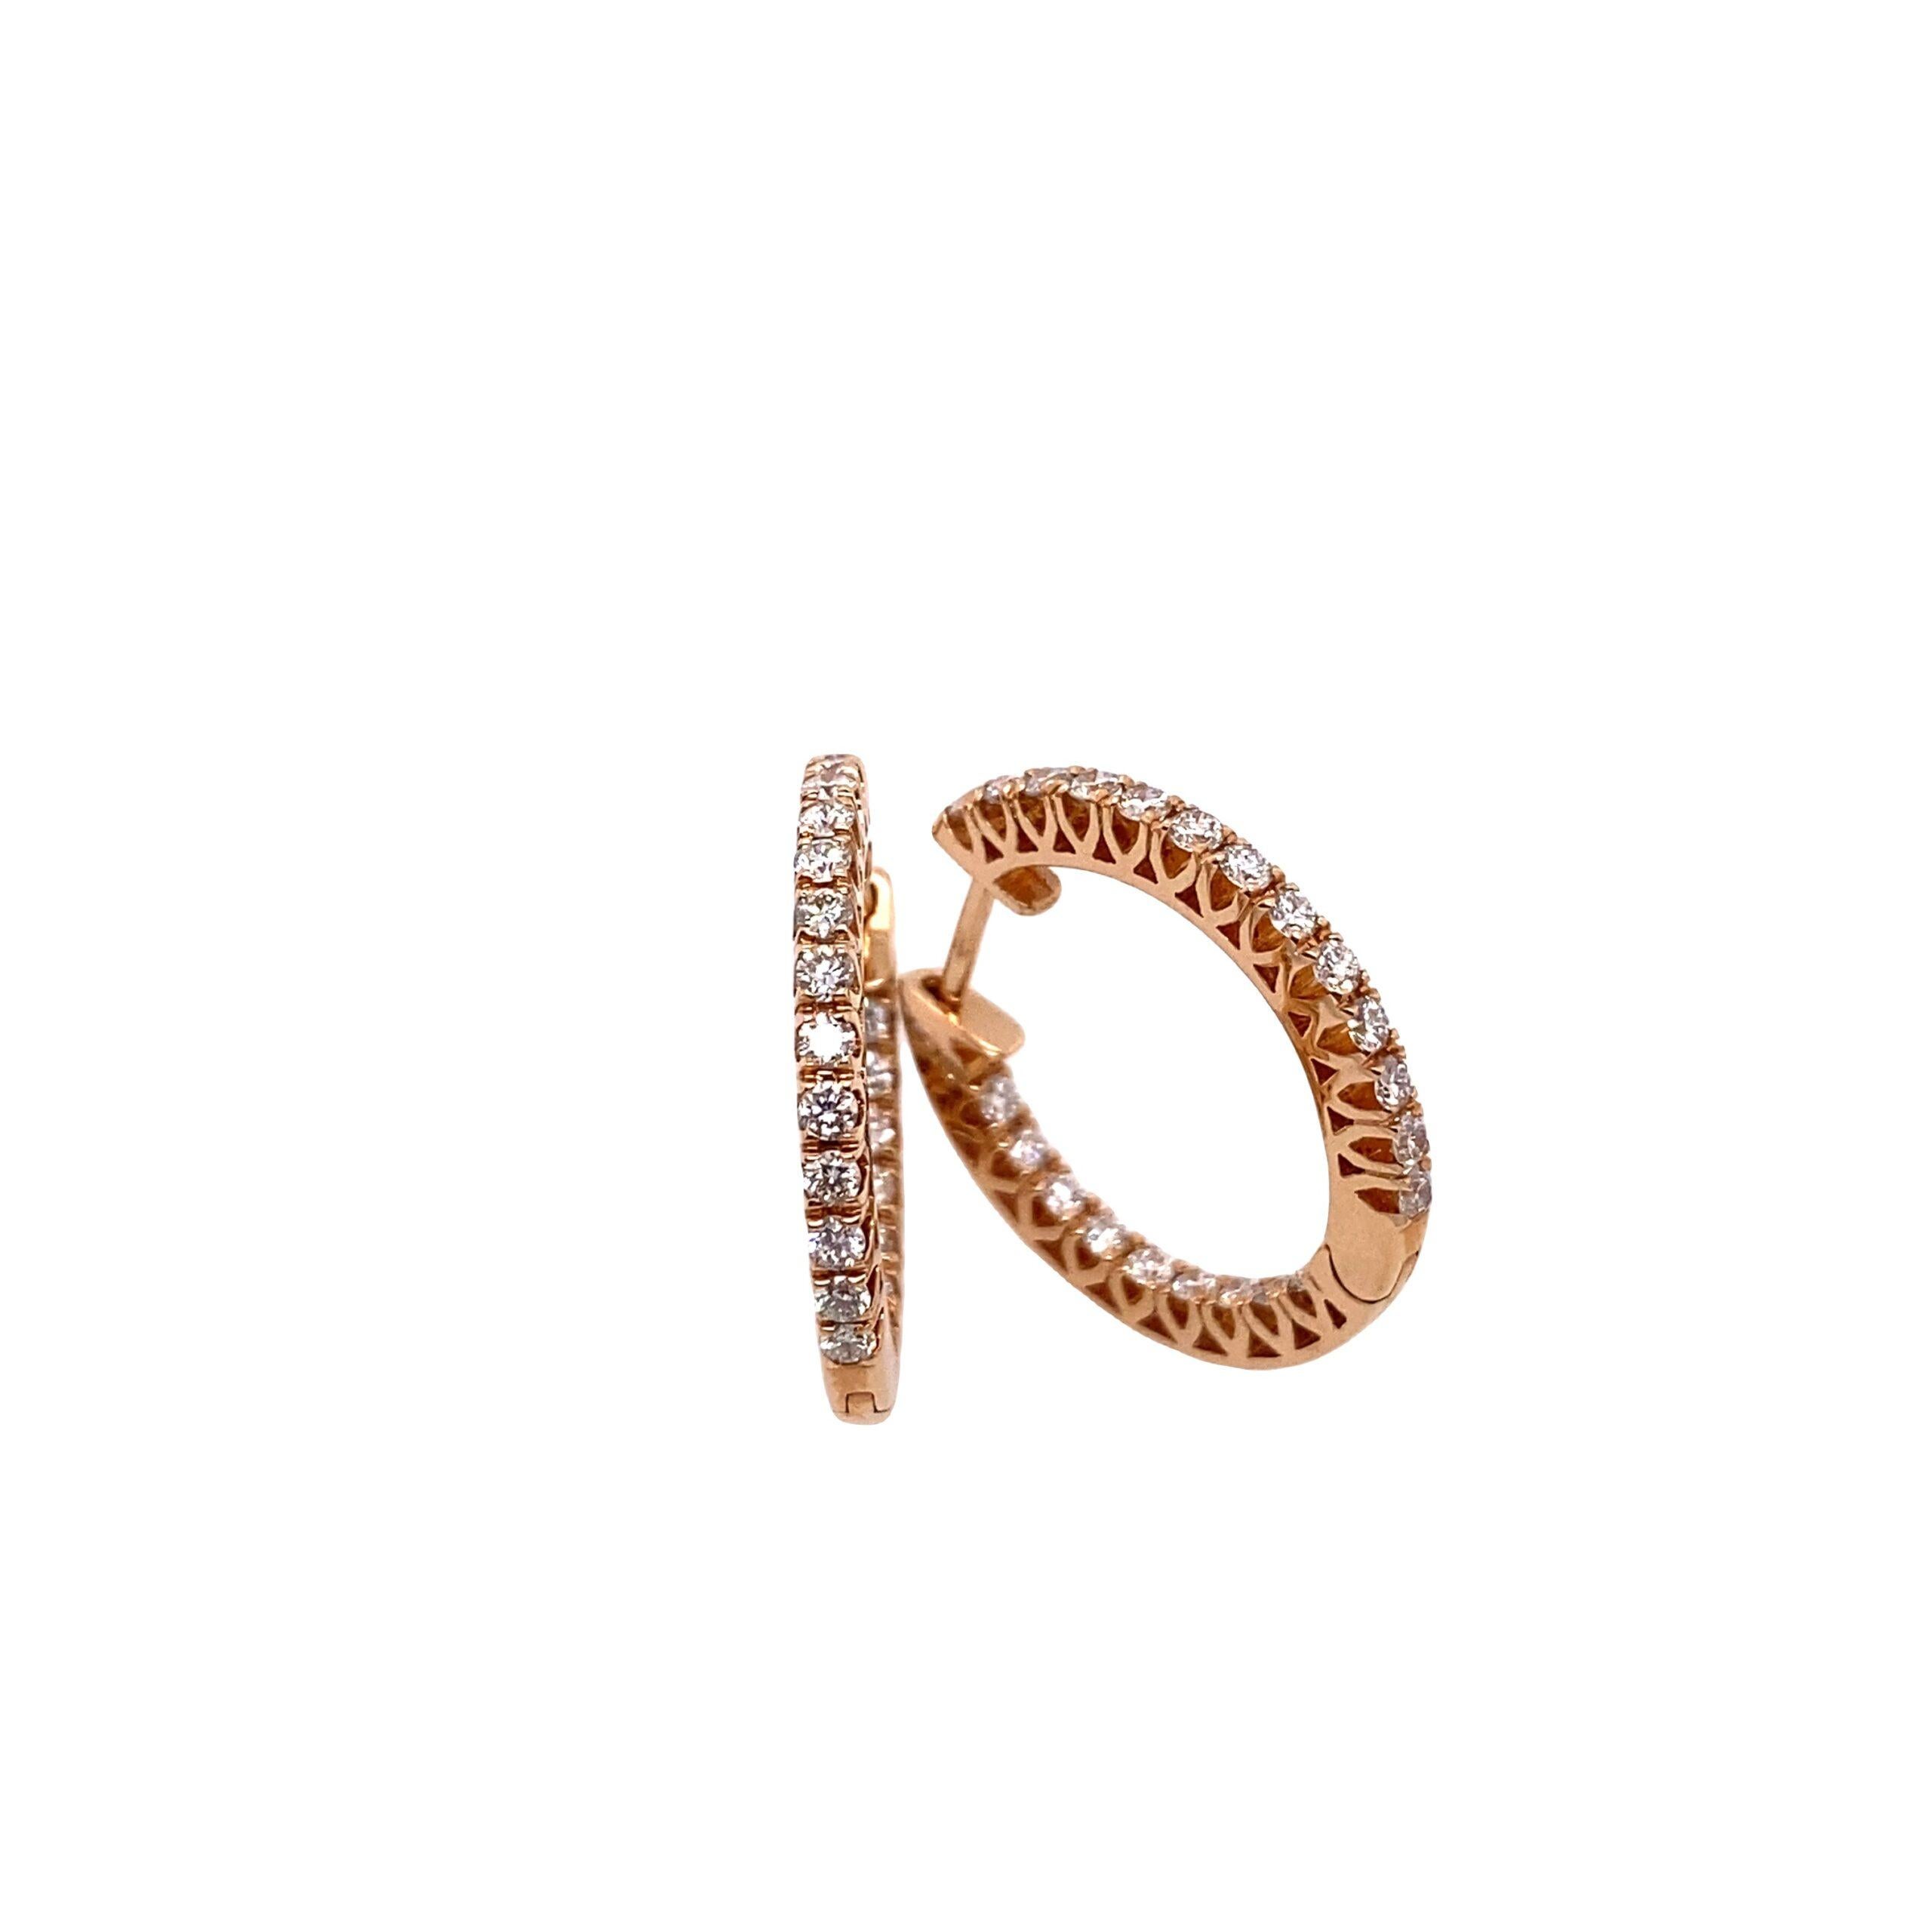 18ct Rose Gold Diamond Hoop Earrings, Set With 0.88ct Of Round Diamonds,20mm

The earrings measure 20mm in diameter and are set with 0.88ct of round diamonds. The earrings are a great choice for women who
love to wear jewellery that is both classy